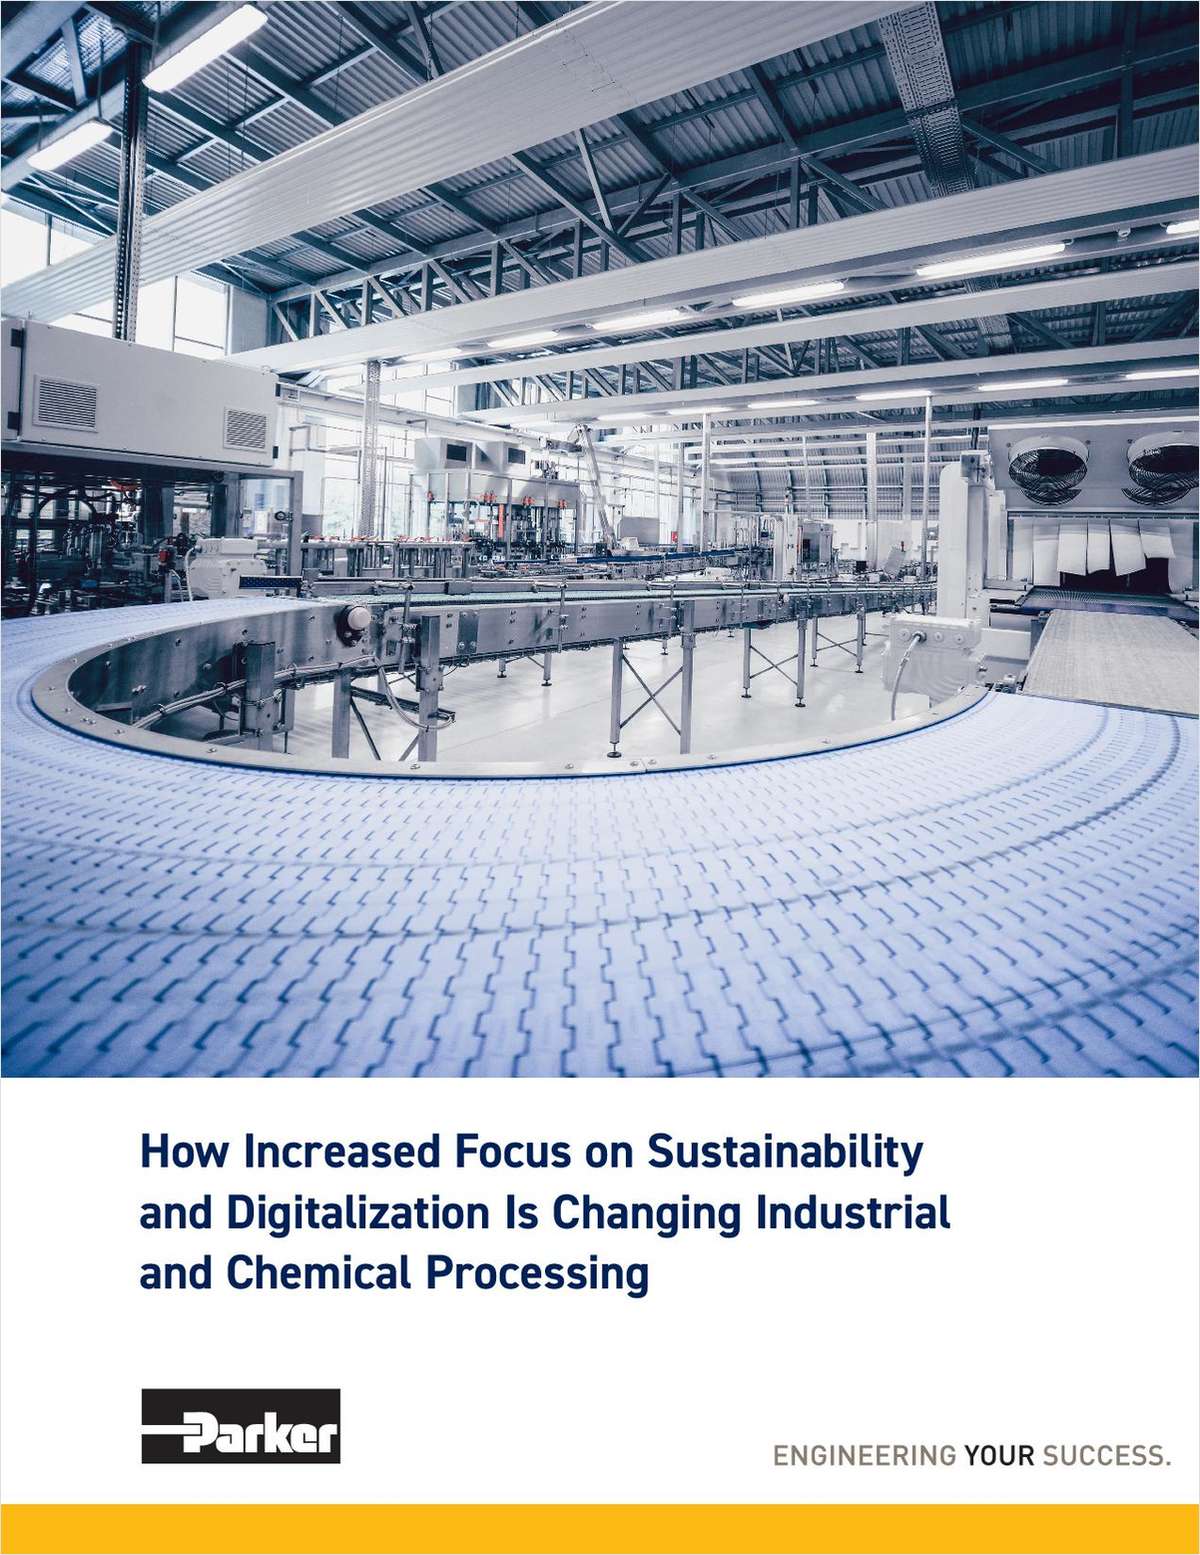 Industrial & Chemical Processing: Focus on Digitalization